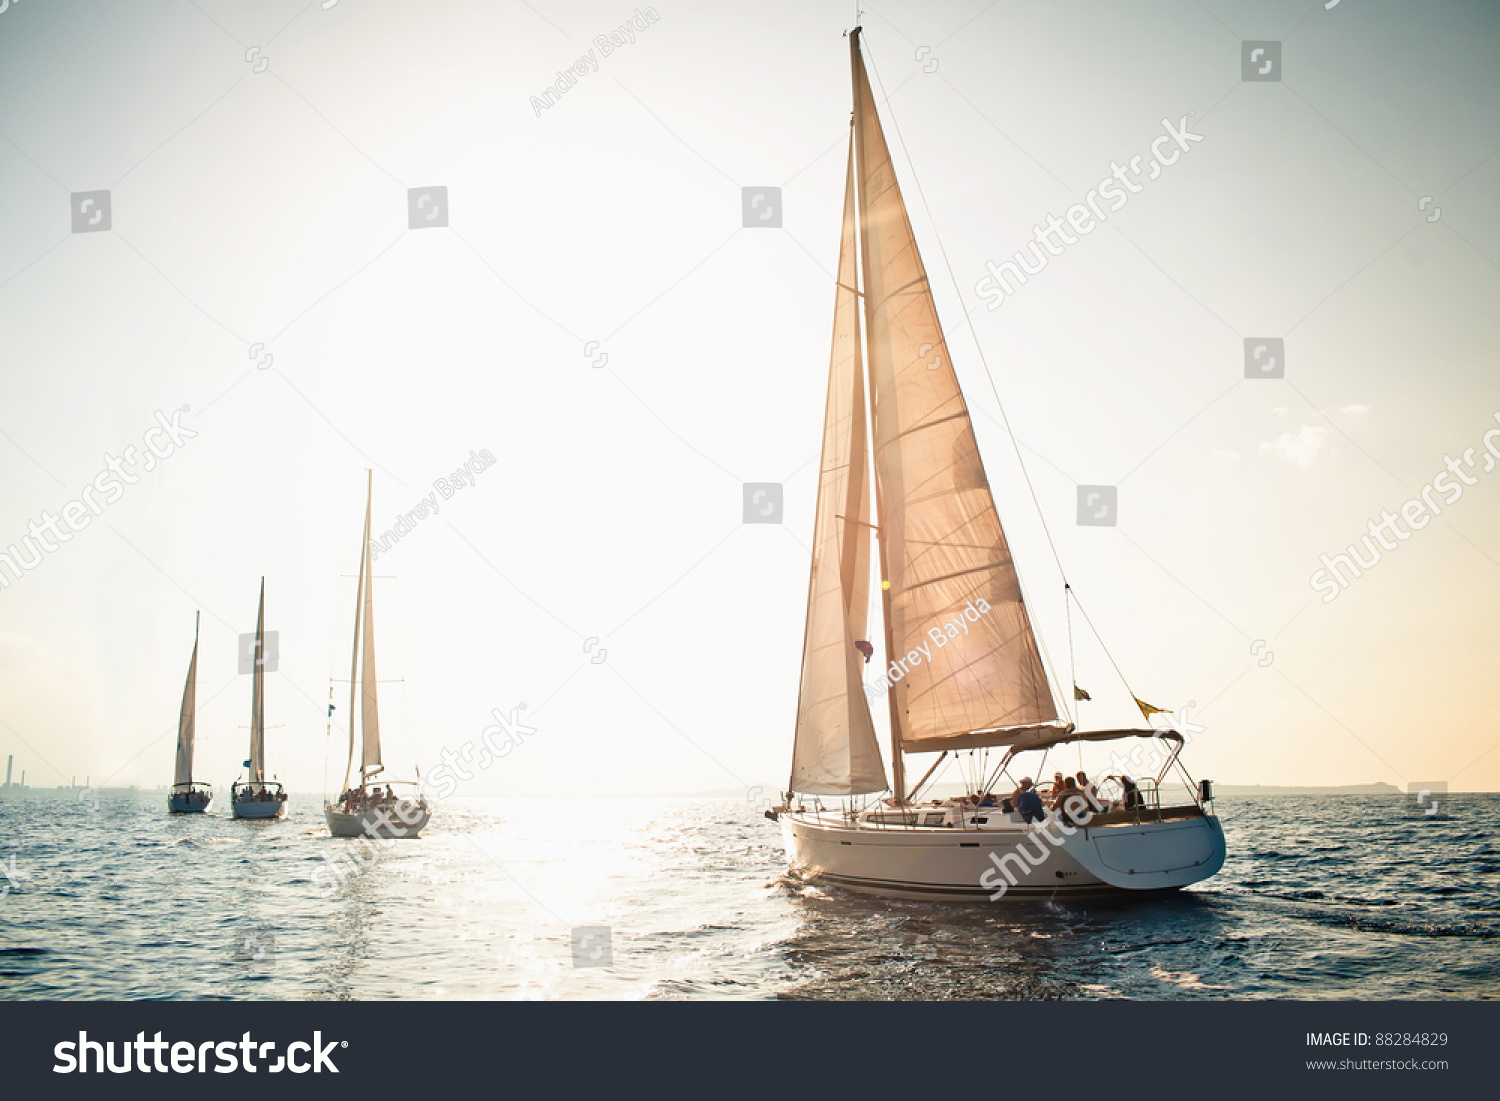 Sailing ship yachts with white sails in a row #88284829